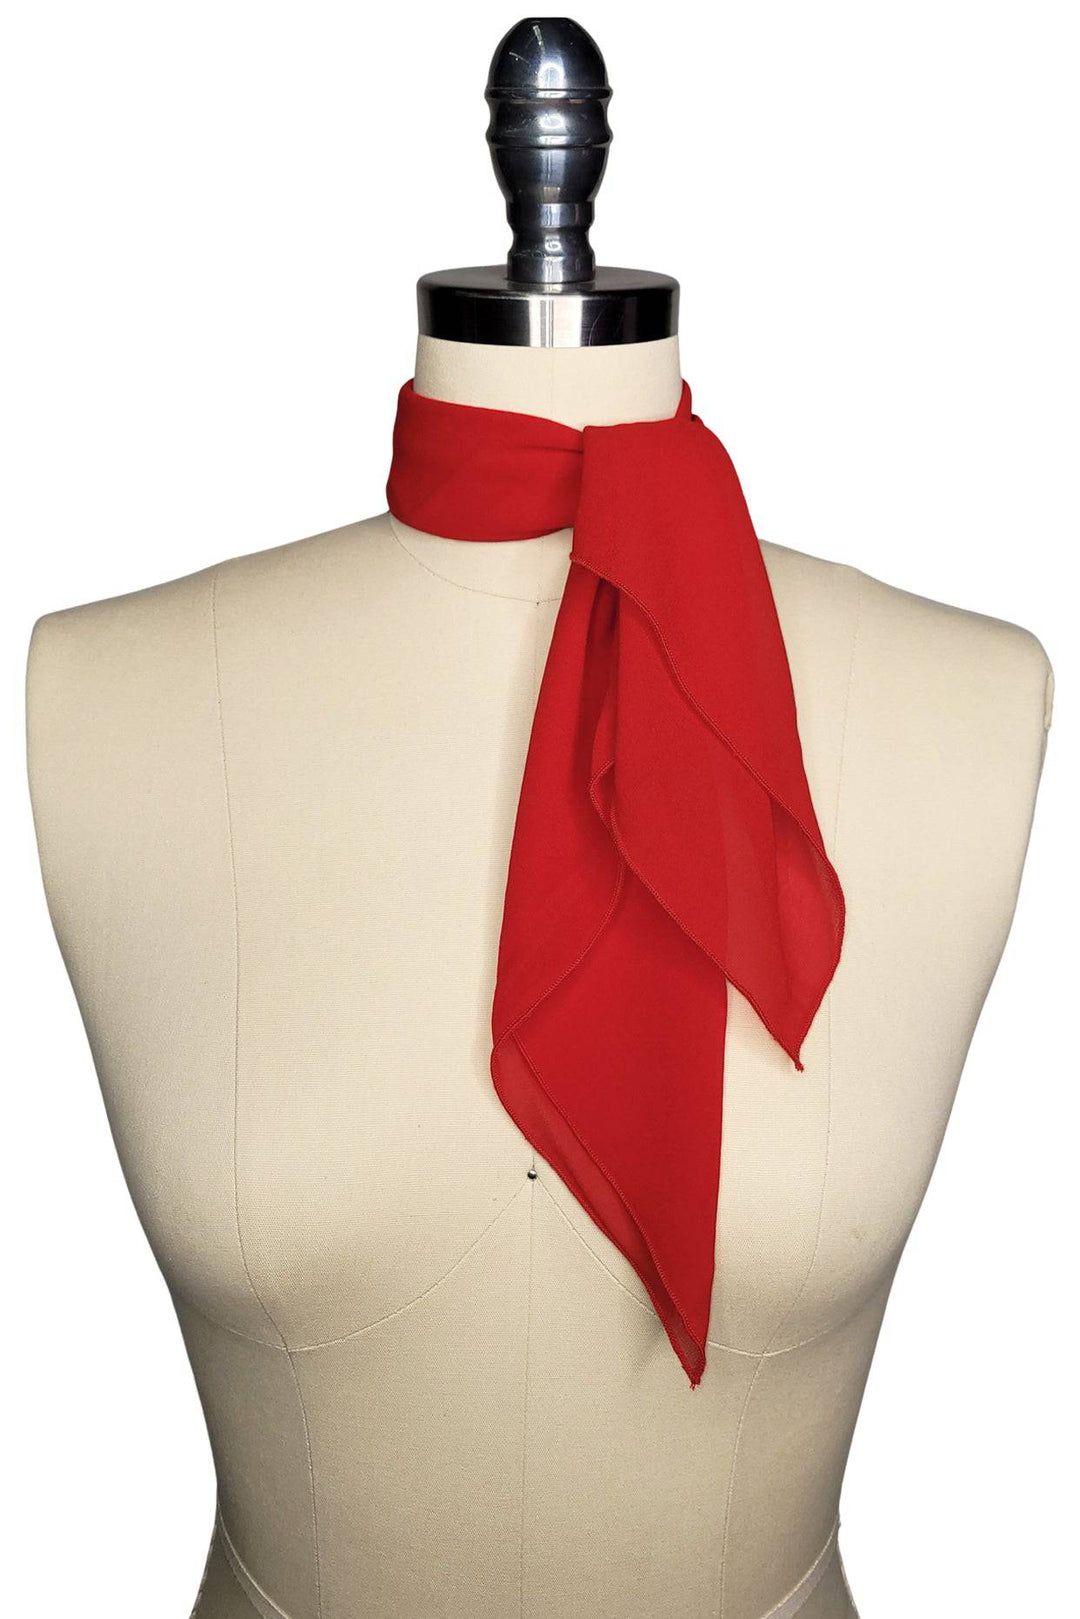 Verona Square Neck Scarf (Red) - Kitten D'Amour